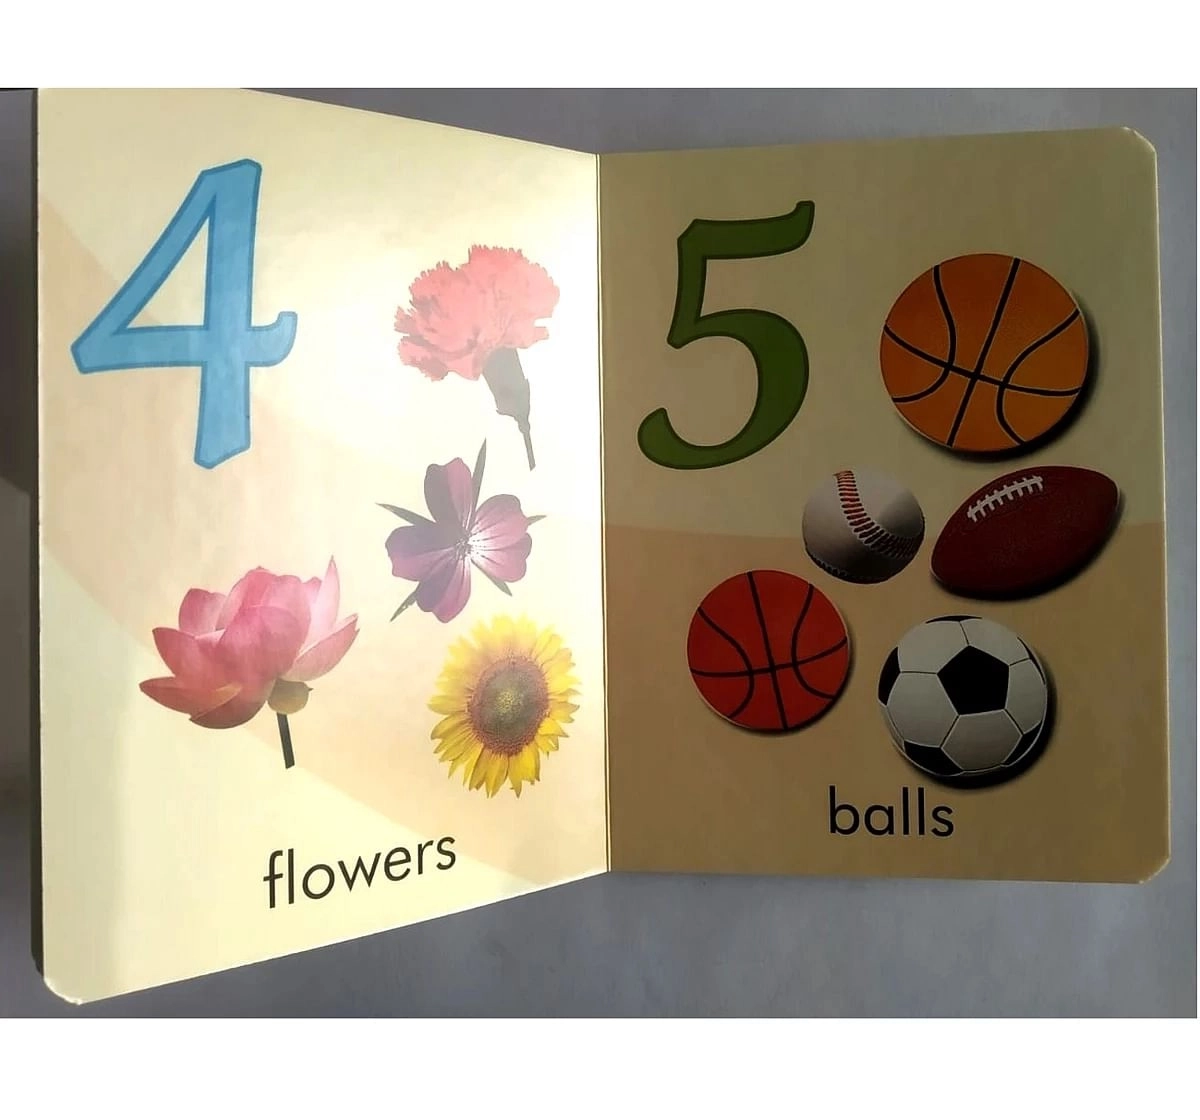 Sterling Horizons Picture Books Numbers Multicolour 3Y+